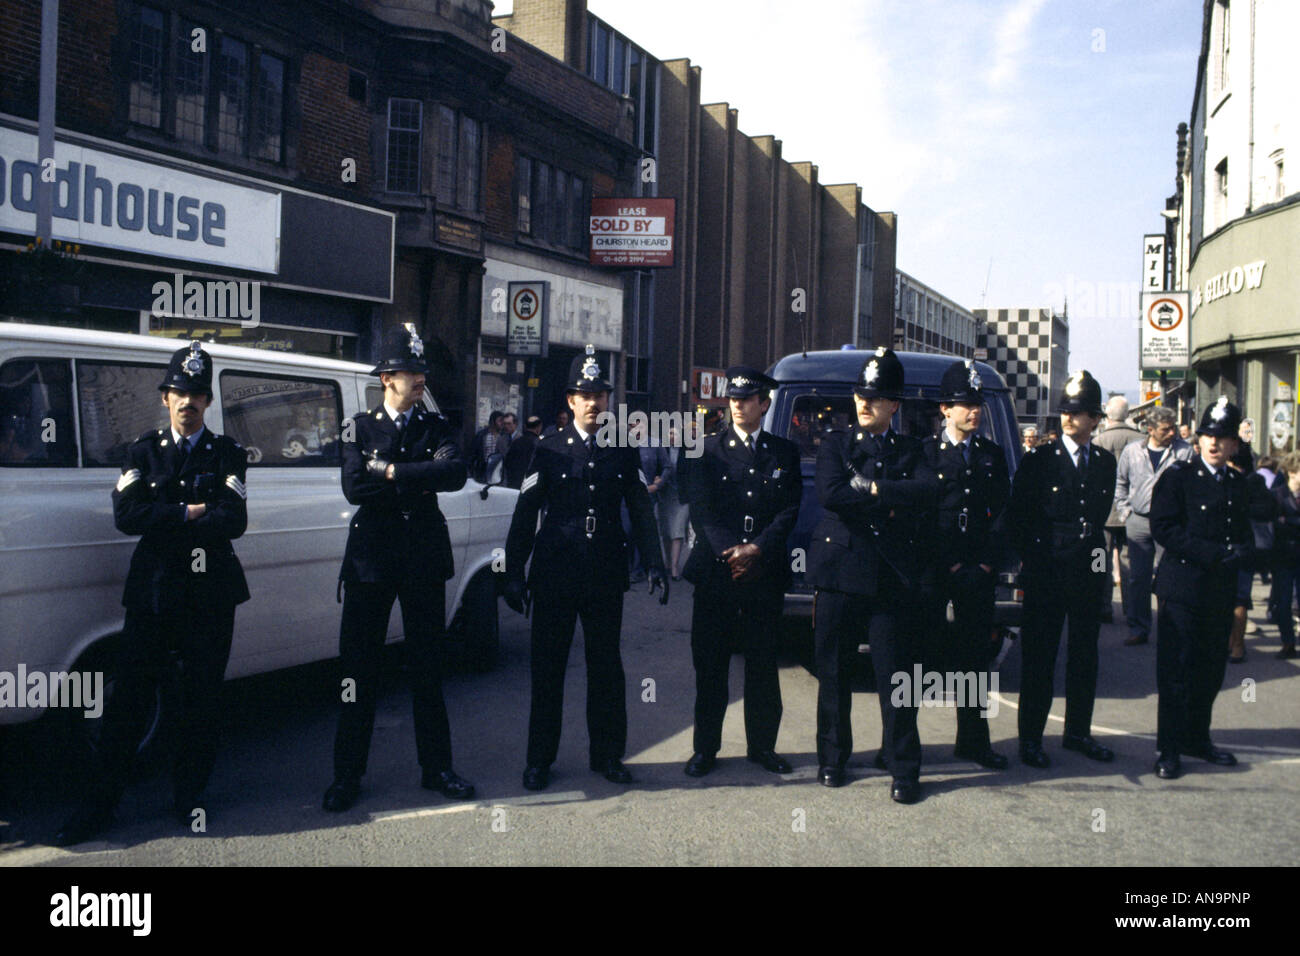 Derbyshire Police form a line to police striking miners during protest rally in Chesterfield Derbyshire during 1984 coal strike Stock Photo